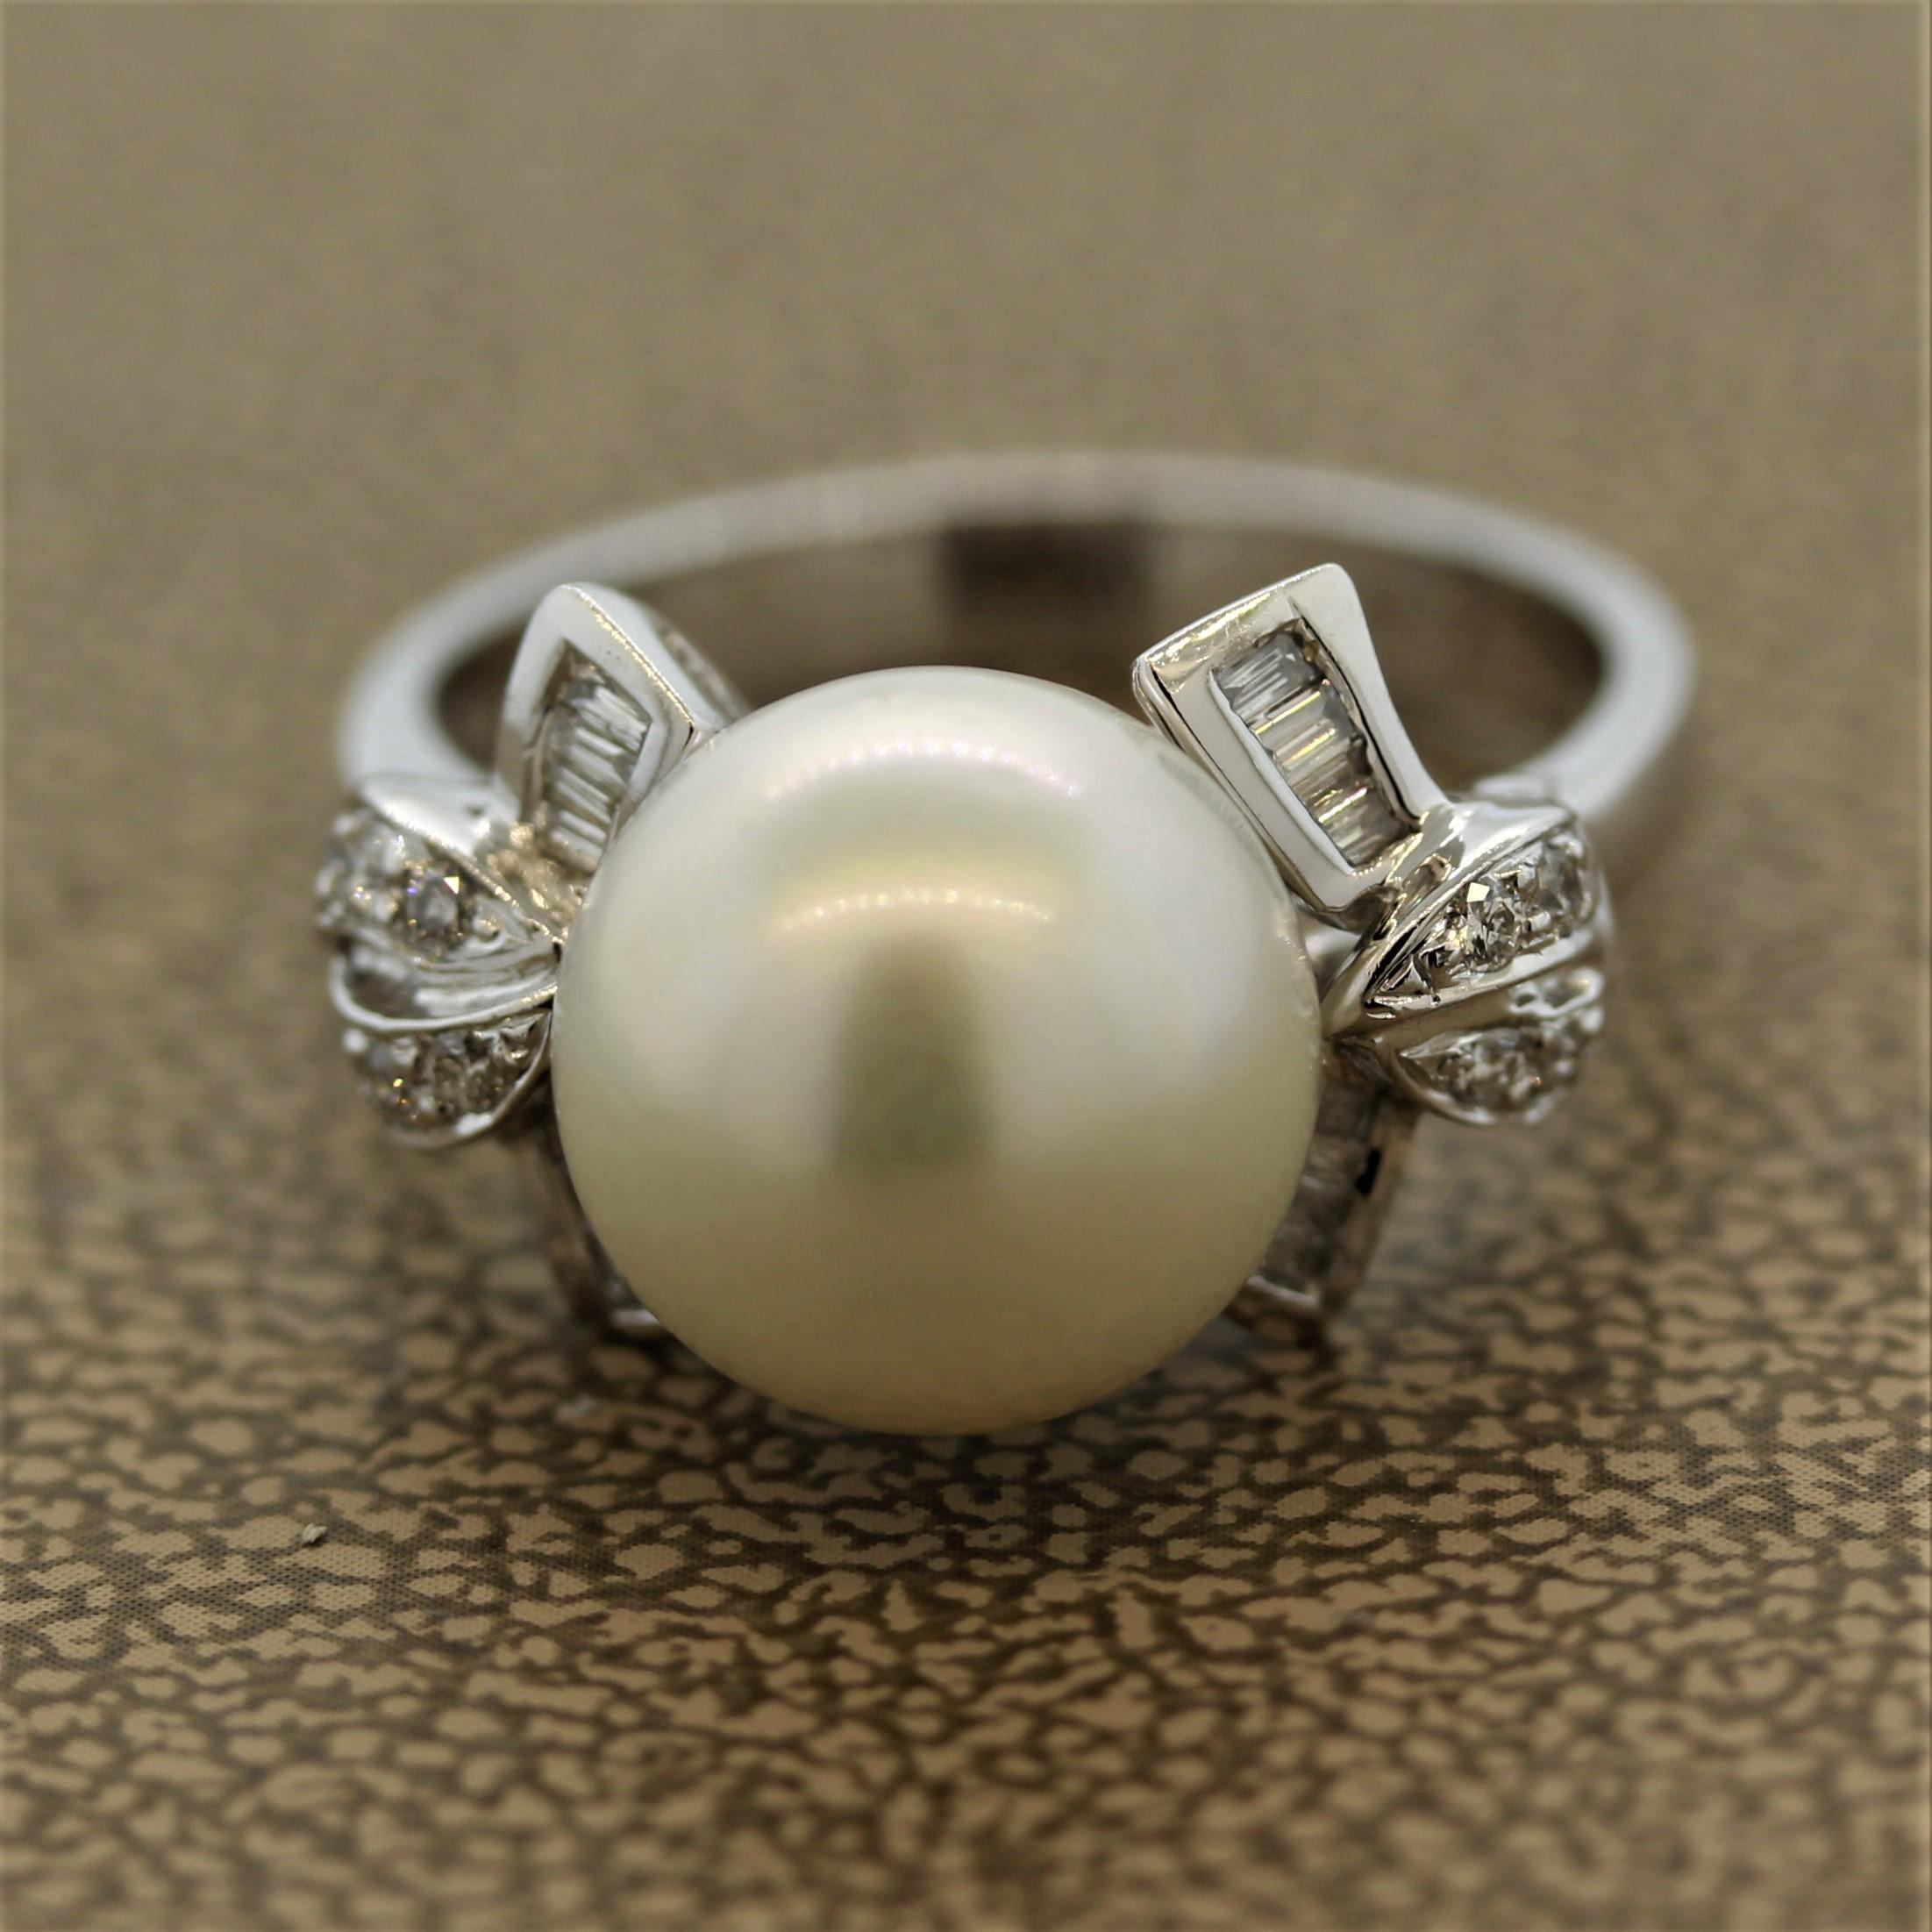 A sweet South Sea pearl ring that can be worn every day. The round smooth pearl measures 10.5mm and has an excellent luster. It is accented by 0.22 carats of round and baguette cut diamonds et in 18k white gold.

Ring Size: 6.75